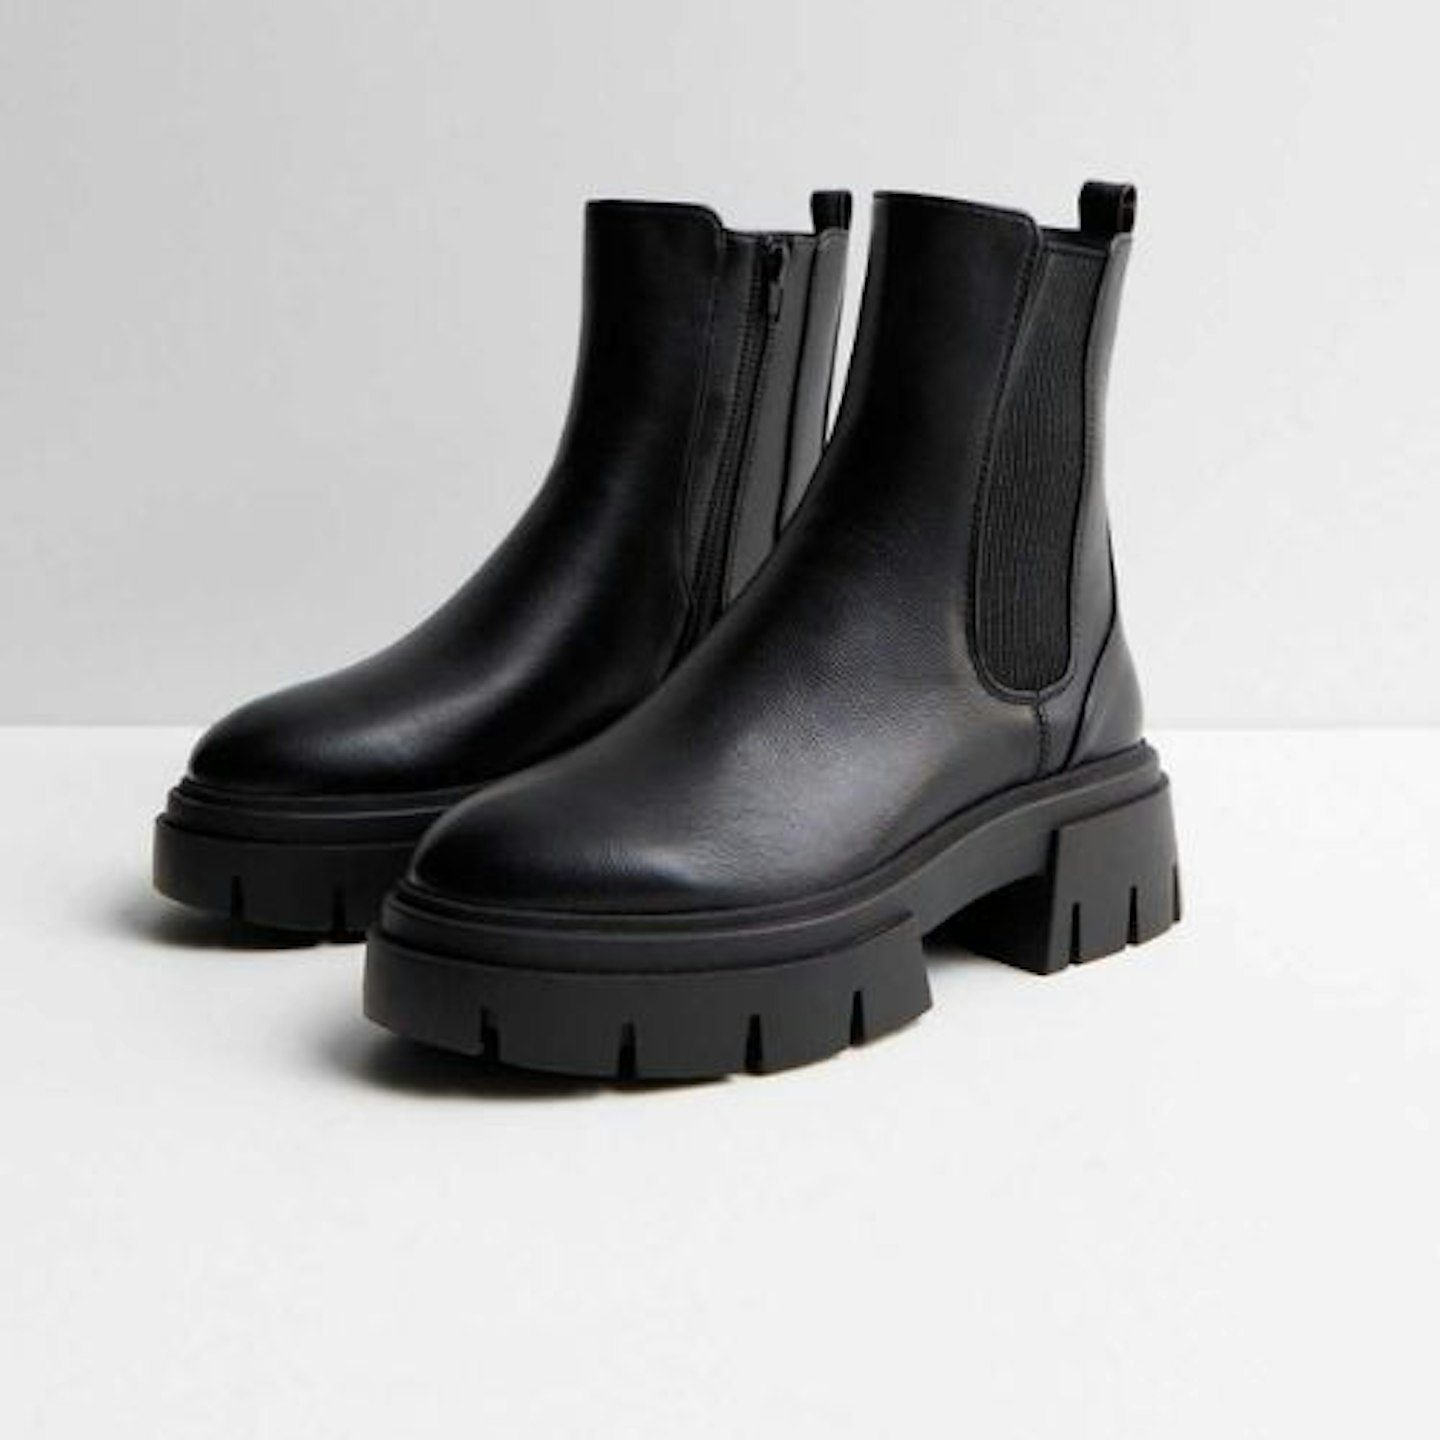 The best chunky boots to walk into the new year with